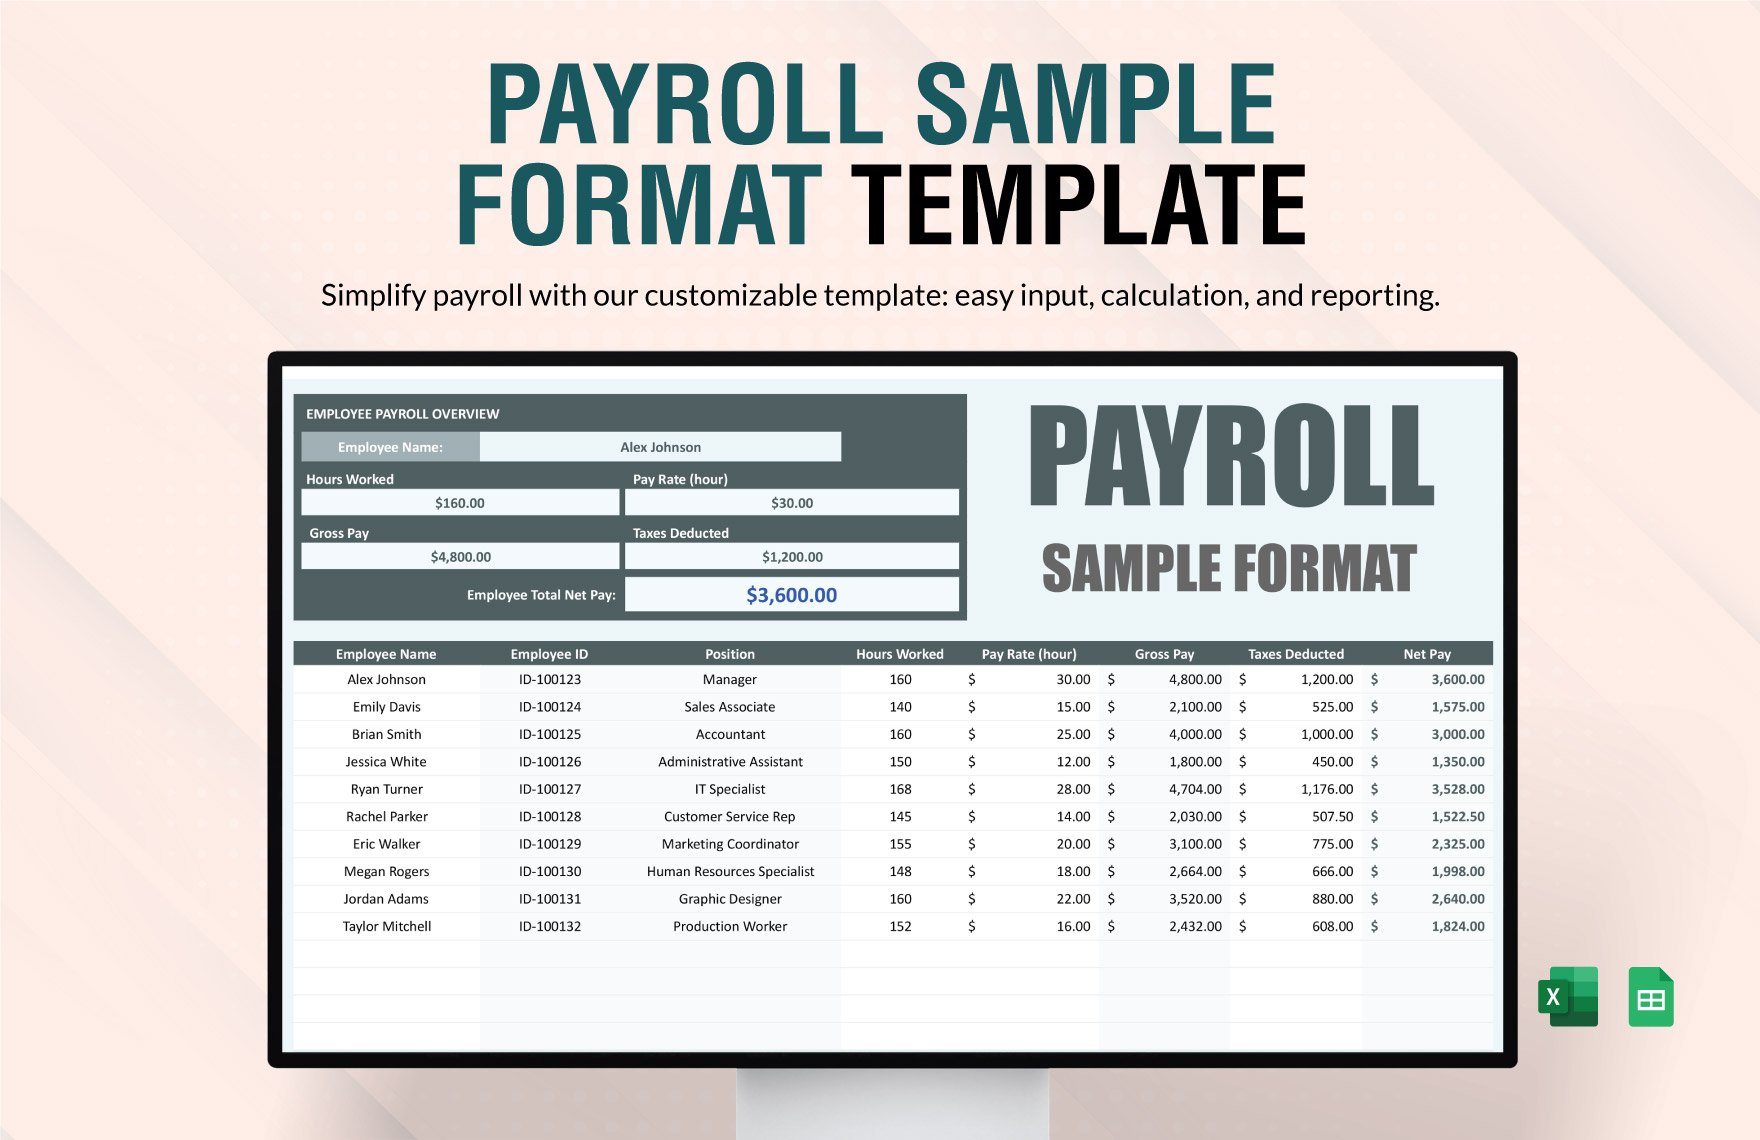 Free Payroll Sample Format Template in Excel, Google Sheets